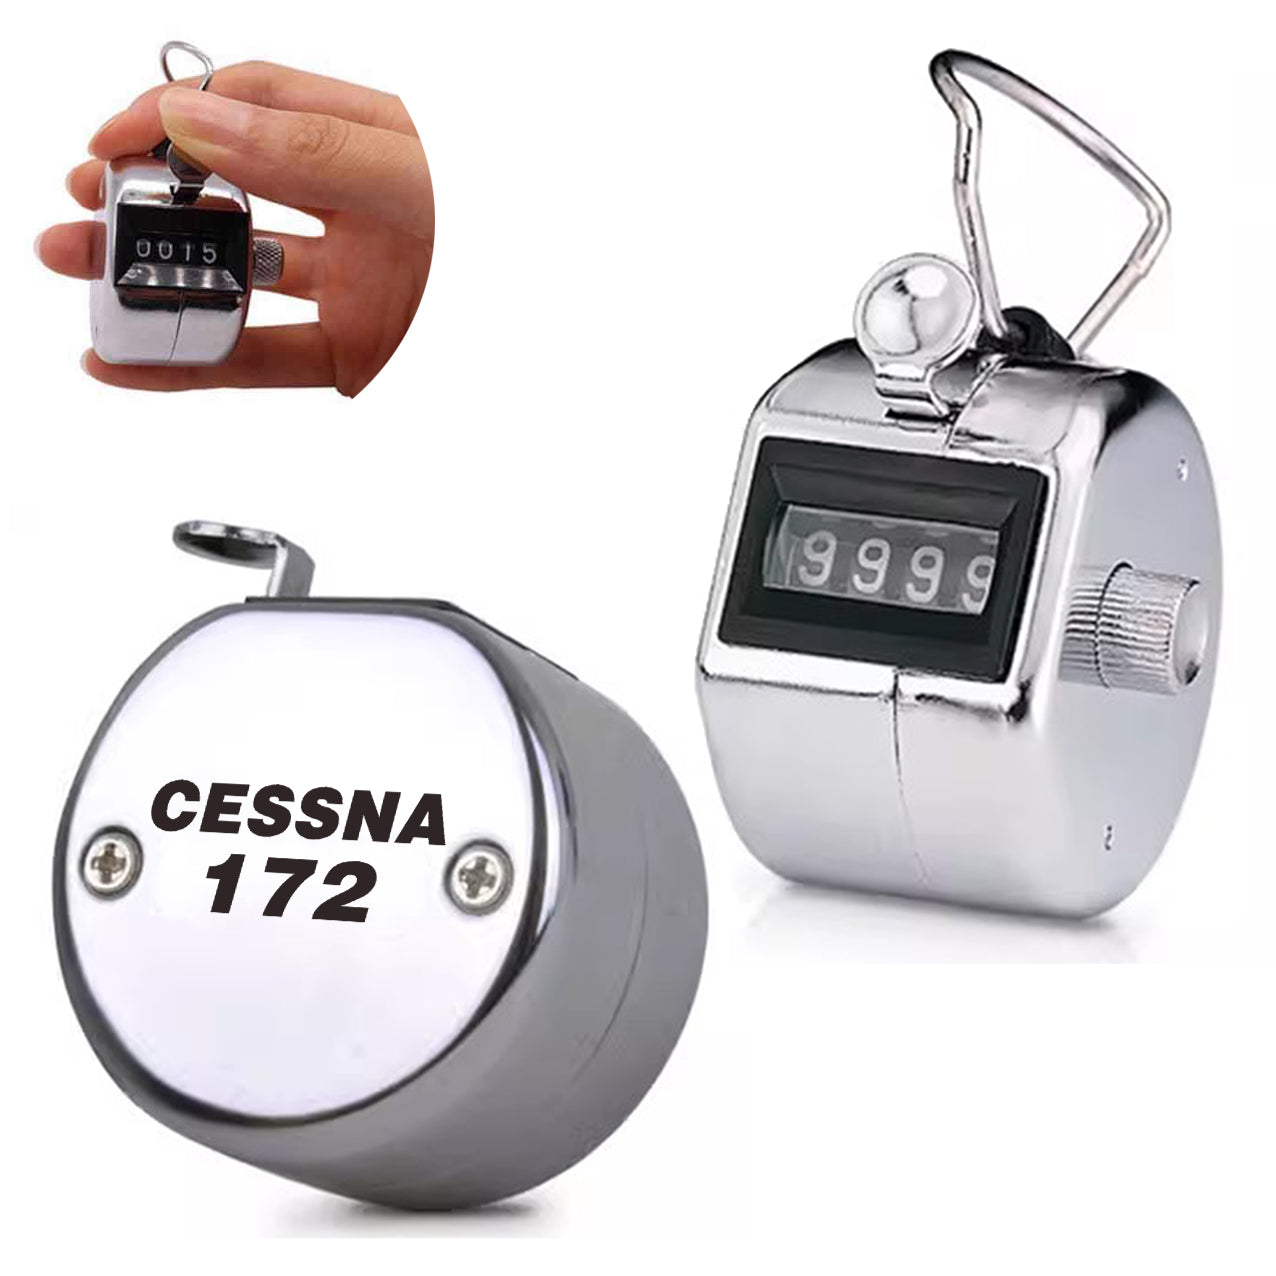 The Cessna 172 Designed Metal Handheld Counters